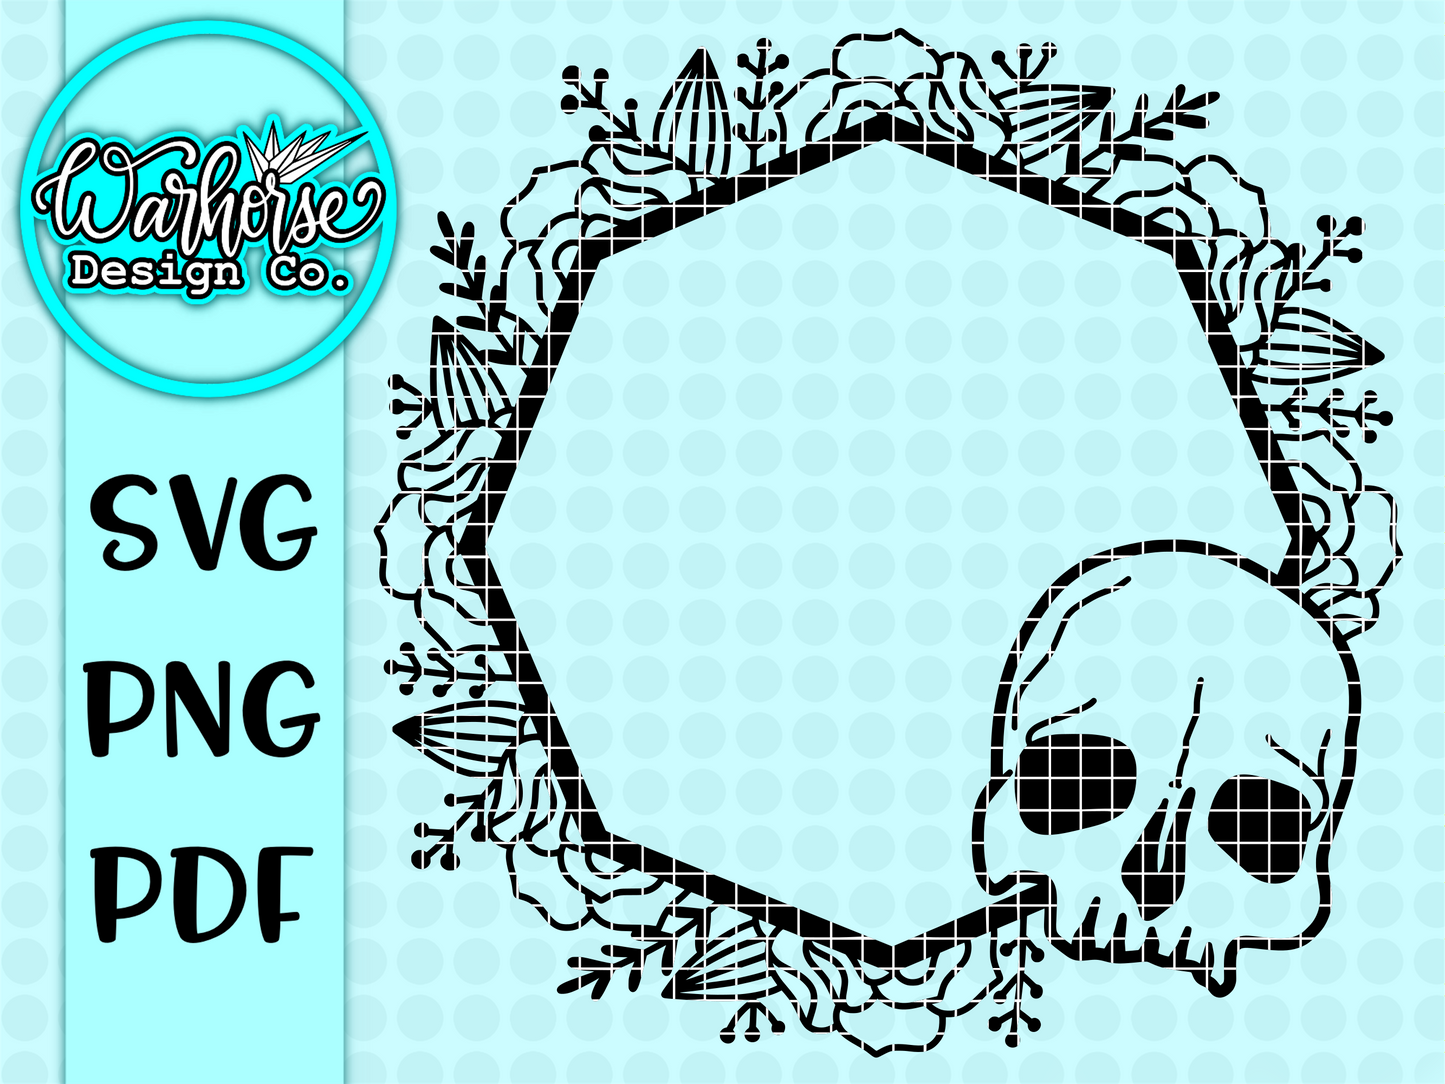 Floral & Skull Wreath Duo SVG PNG PDF